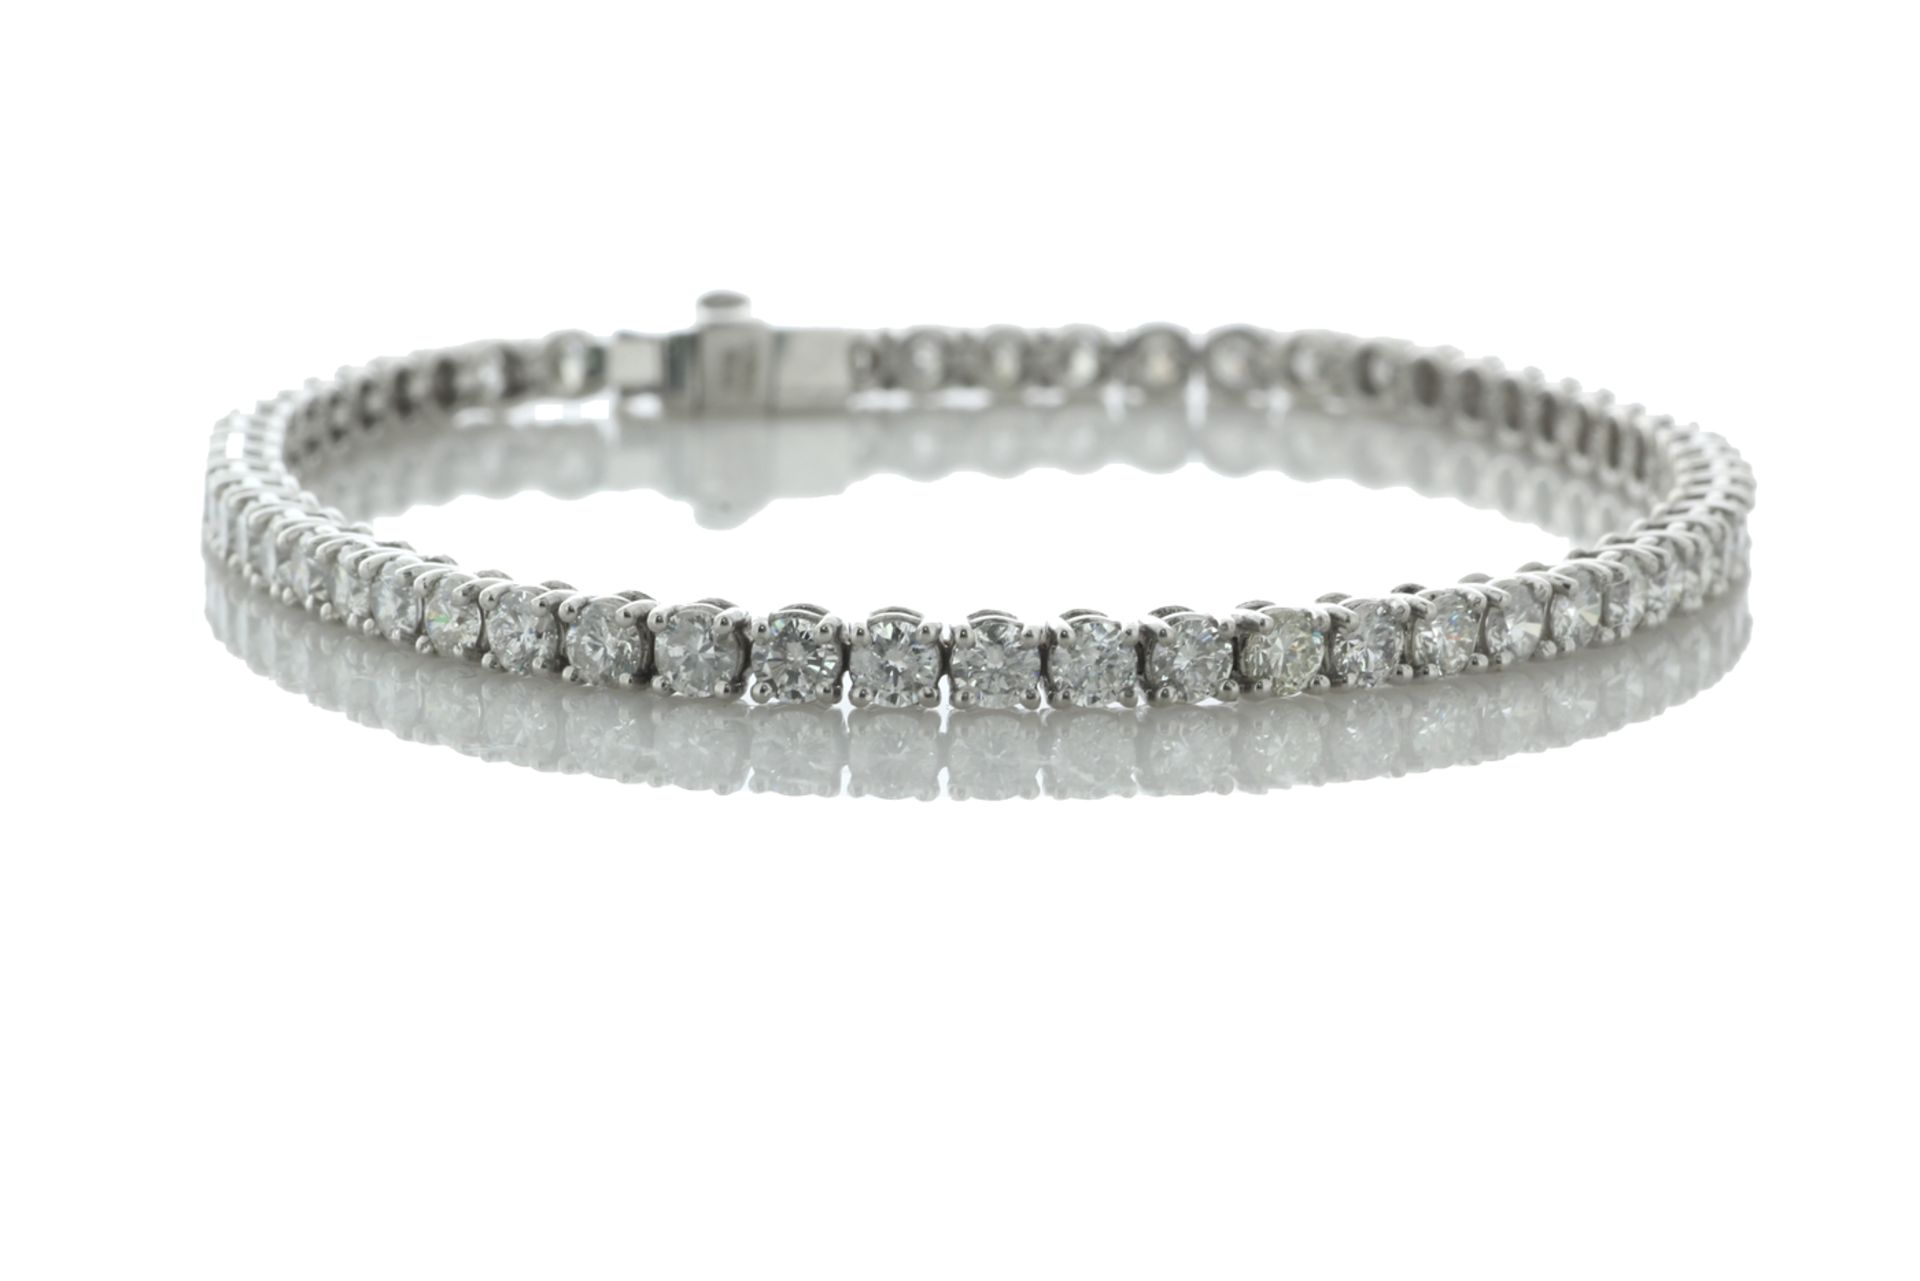 18ct White Gold Tennis Diamond Bracelet 4.83 Carats - Valued By IDI £20,620.00 - Fifty eight round